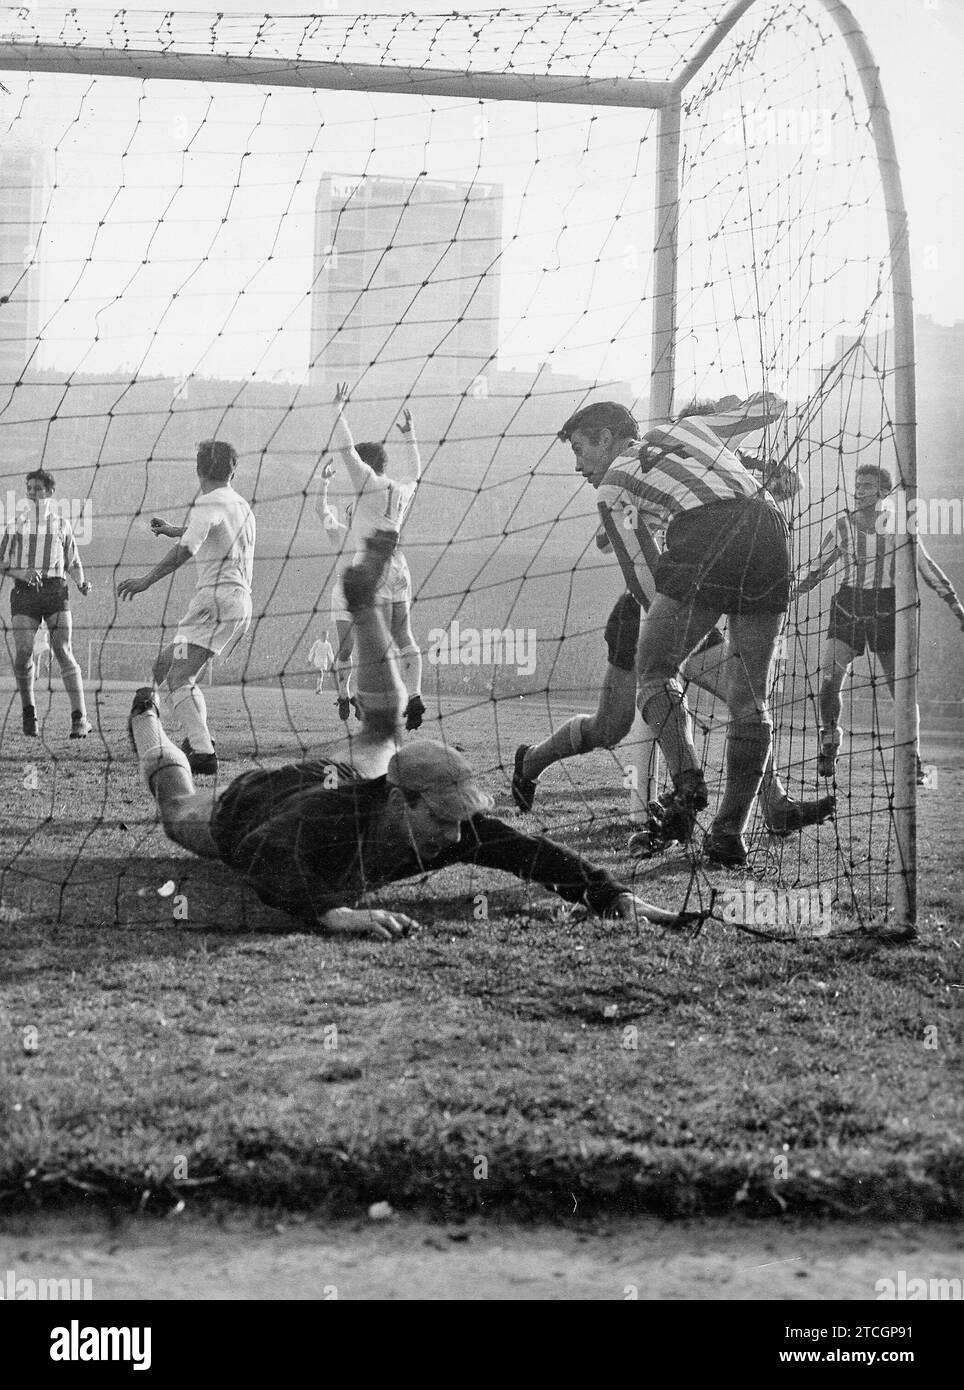 Real Madrid-Betis First Division League match valid for the 1958-59 season, played at the Santiago Bernabéu stadium on February 1, 1959. Real Madrid won 4-2, with goals from Rial, Herrera (two) and Di Stefano for the locals, and Del Sol and Castaño. Ortiz de Mendíbil refereed. In the image, one of Real Madrid's four goals. In the first place, inside the goal, the Betic goalkeeper Menéndez and the Verdiblanco defender Isidro, father of Quique Sánchez Flores. (Photo Sanz Bermejo). Credit: Album / Archivo ABC / Manuel Sanz Bermejo Stock Photo